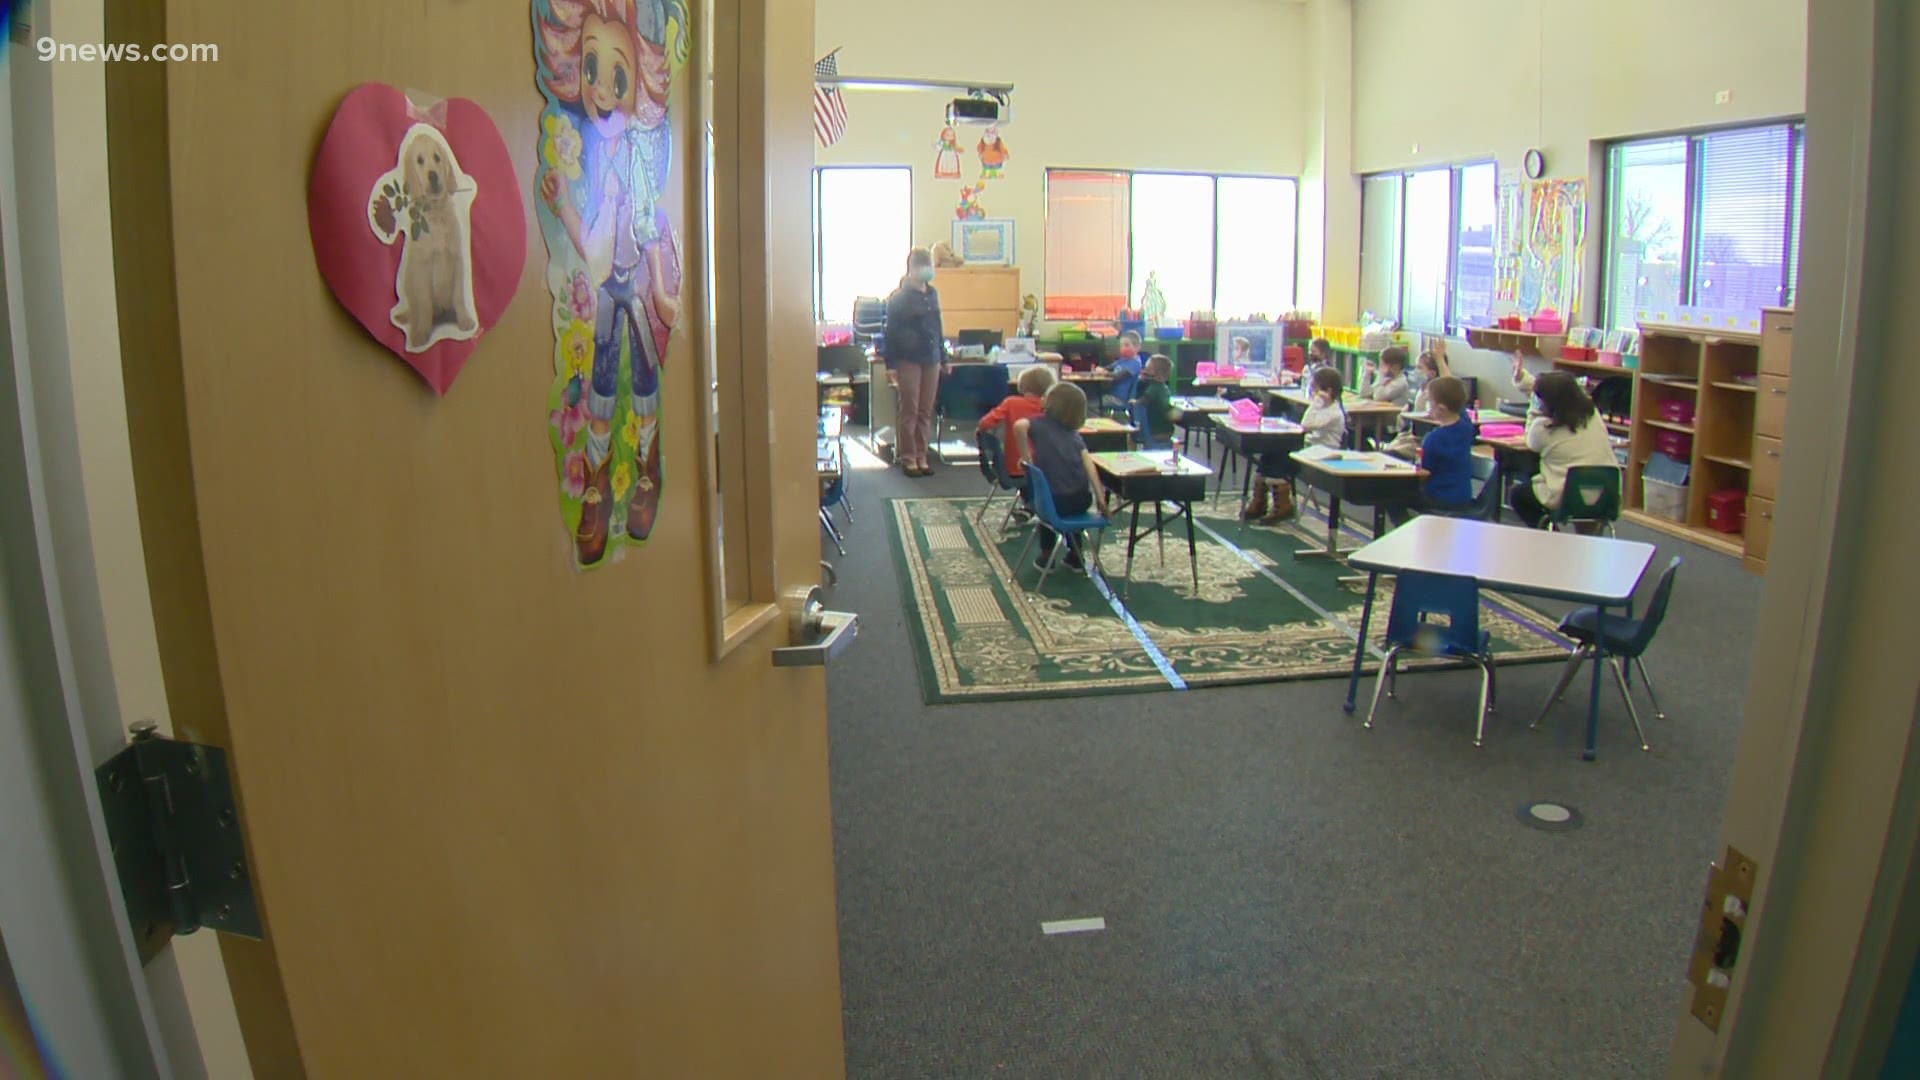 The language immersion charter school returned to in-person learning in February and teachers say it has helped the students stay focused.